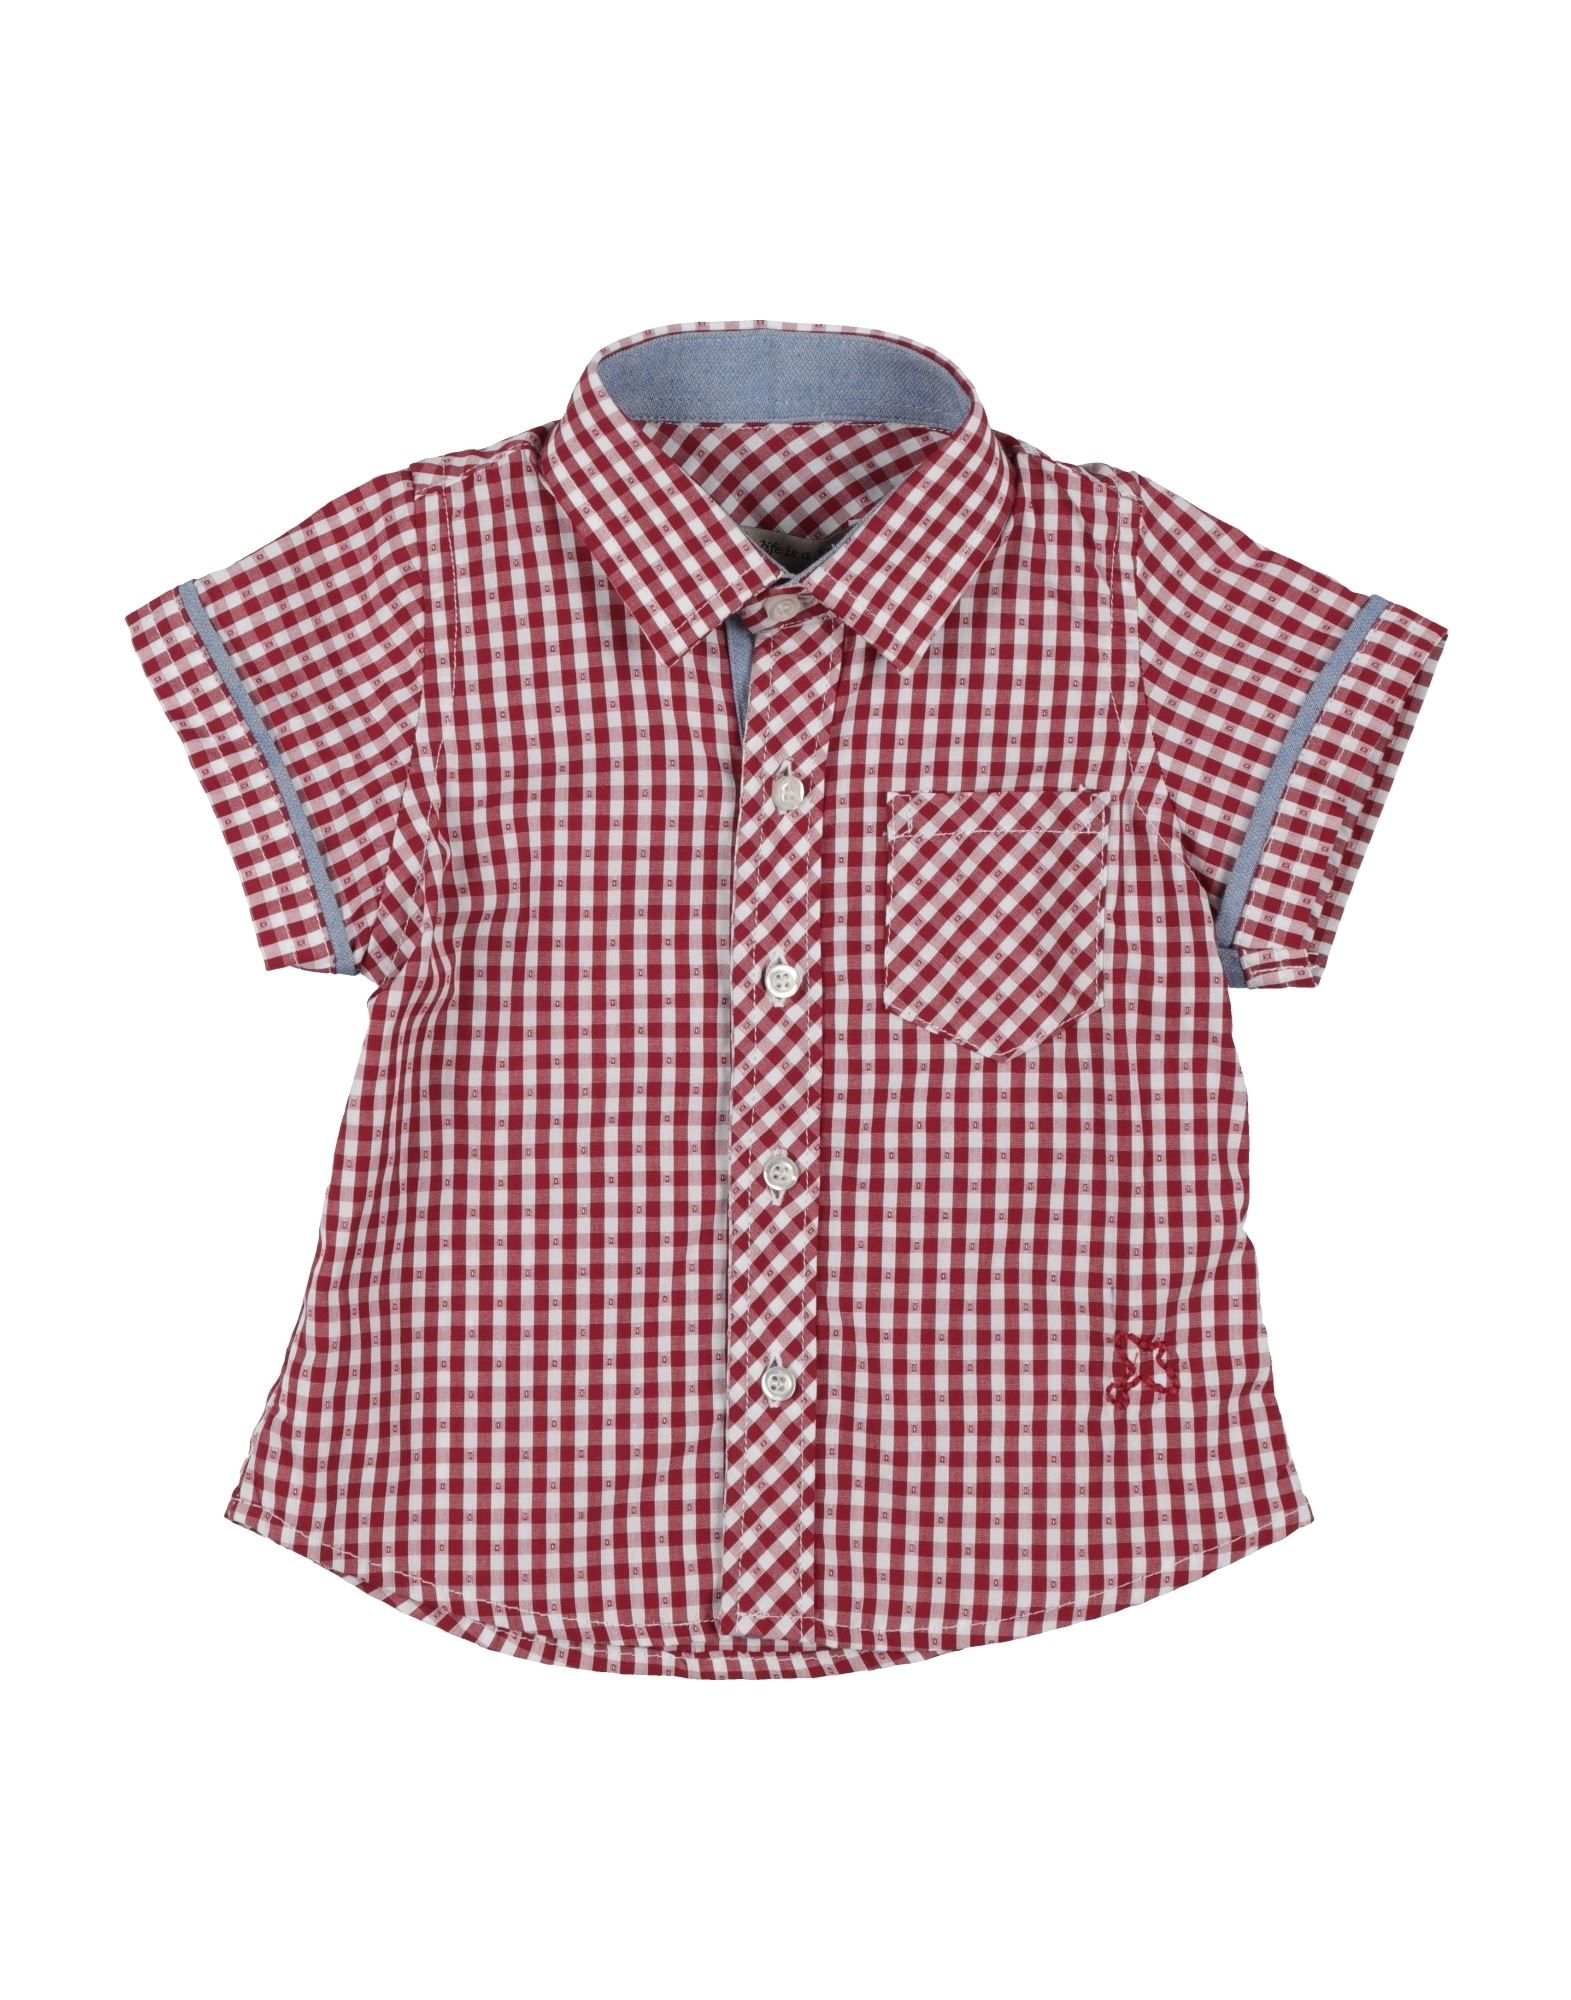 Sp1 Kids' Shirts In Red